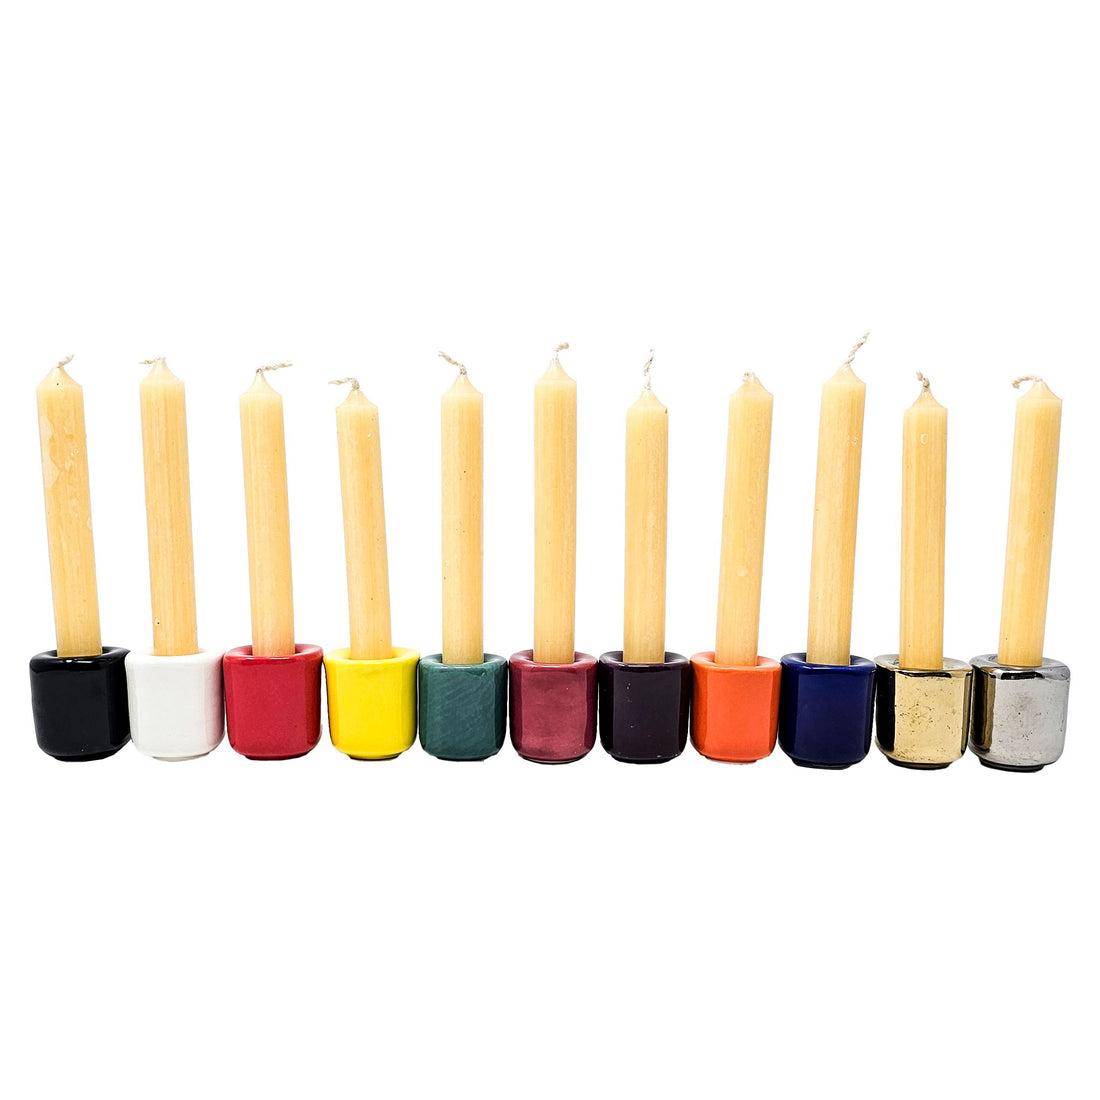 Black Mini Candle Holder Candle -Accessories V115 